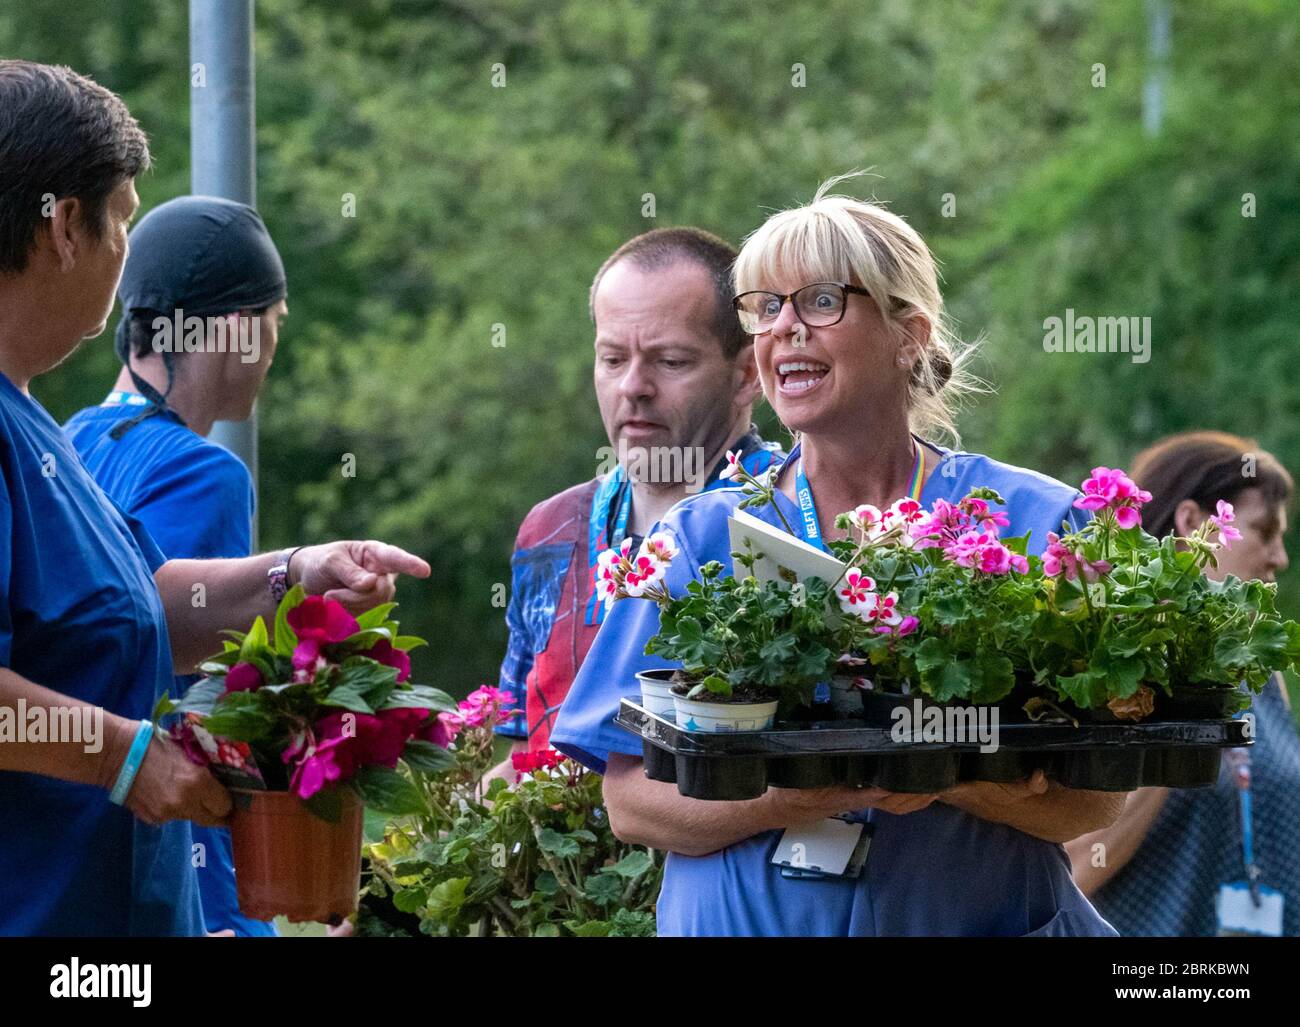 Brentwood Essex 21st May 2020 Clap for NHS at Brentwood Commuity hosptial, currently a covid facility. Local residents had purchased over 120 plants for the staff for their gardens. Another resident of the road had made 'superhero' scrubs for staff some of whom are pictured NHS workers with plants from local residents Credit: Ian Davidson/Alamy Live News Stock Photo